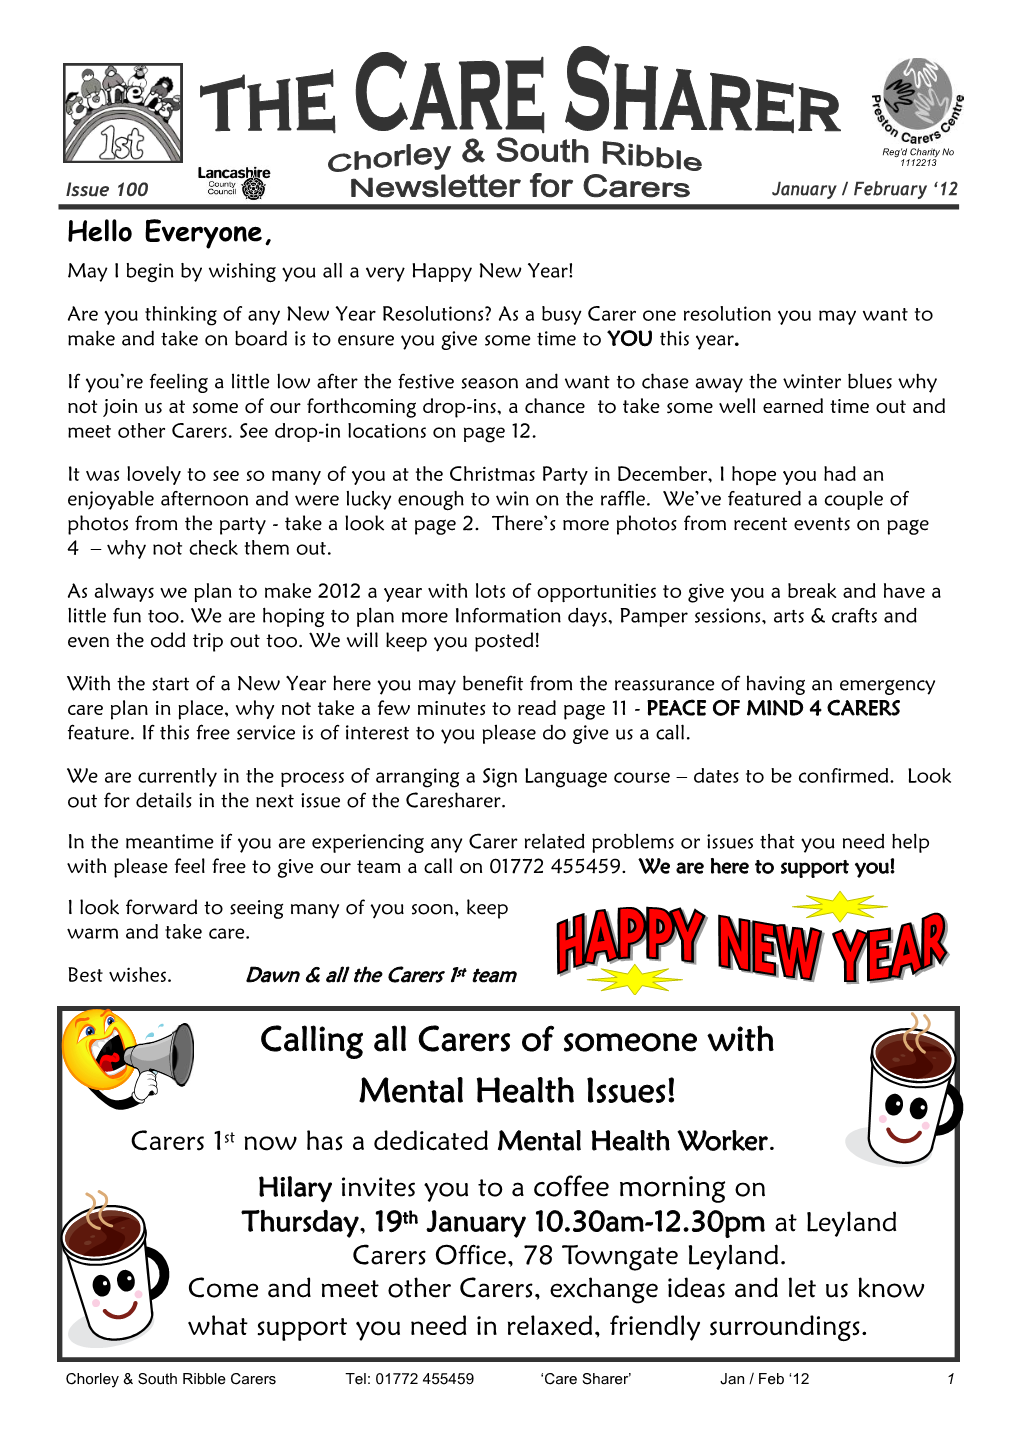 Calling All Carers of Someone with Mental Health Issues! Carers 1St Now Has a Dedicated Mental Health Worker